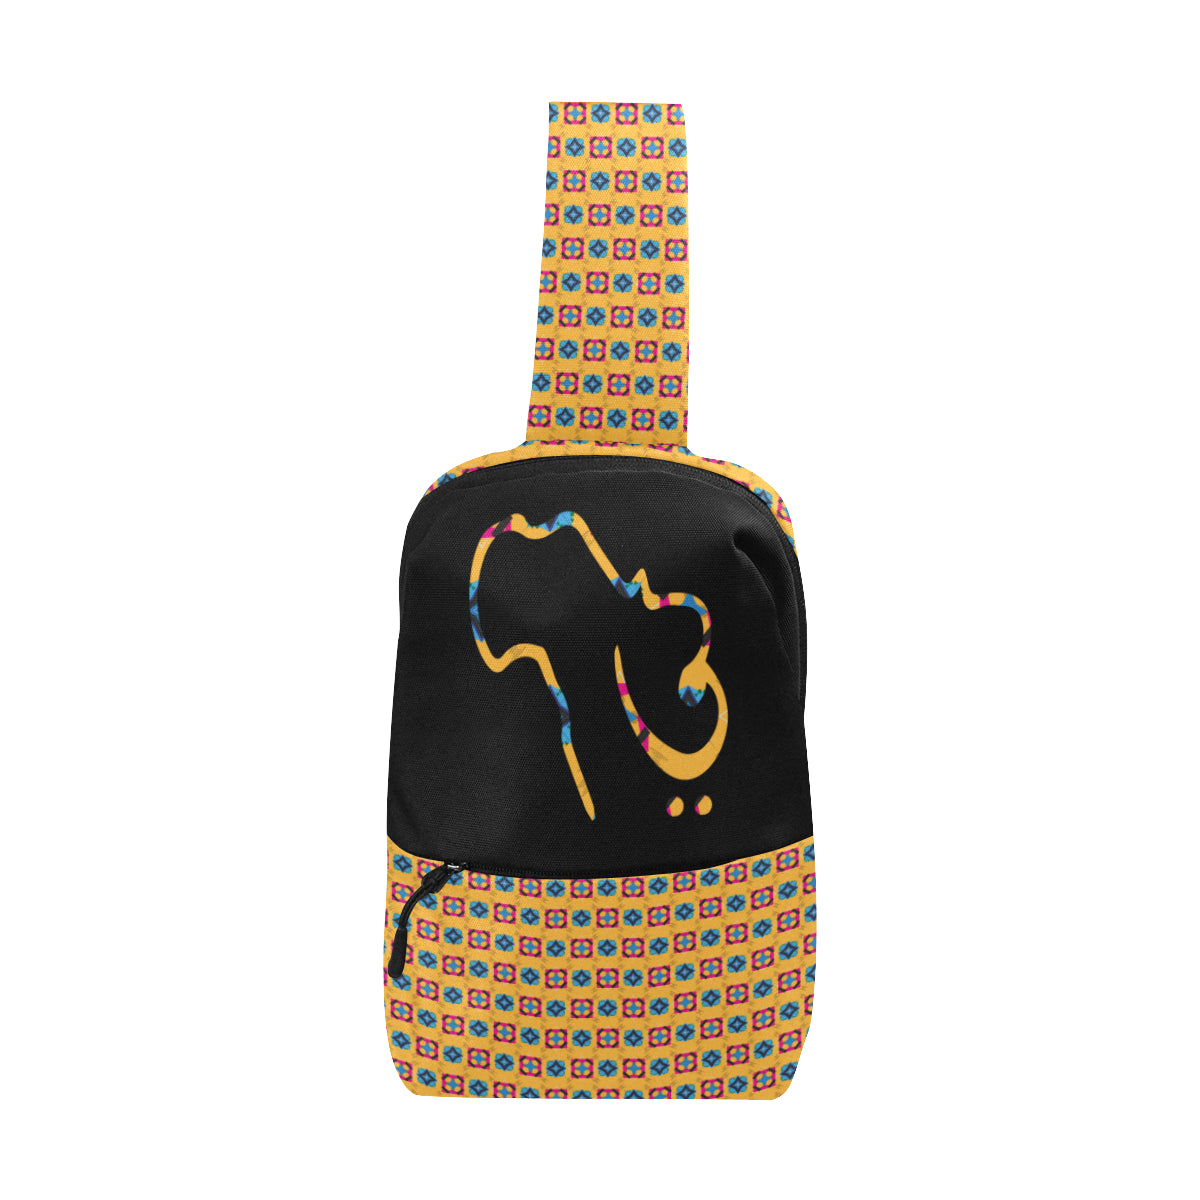 Sounds of Africa Alternate Print Chest Bag